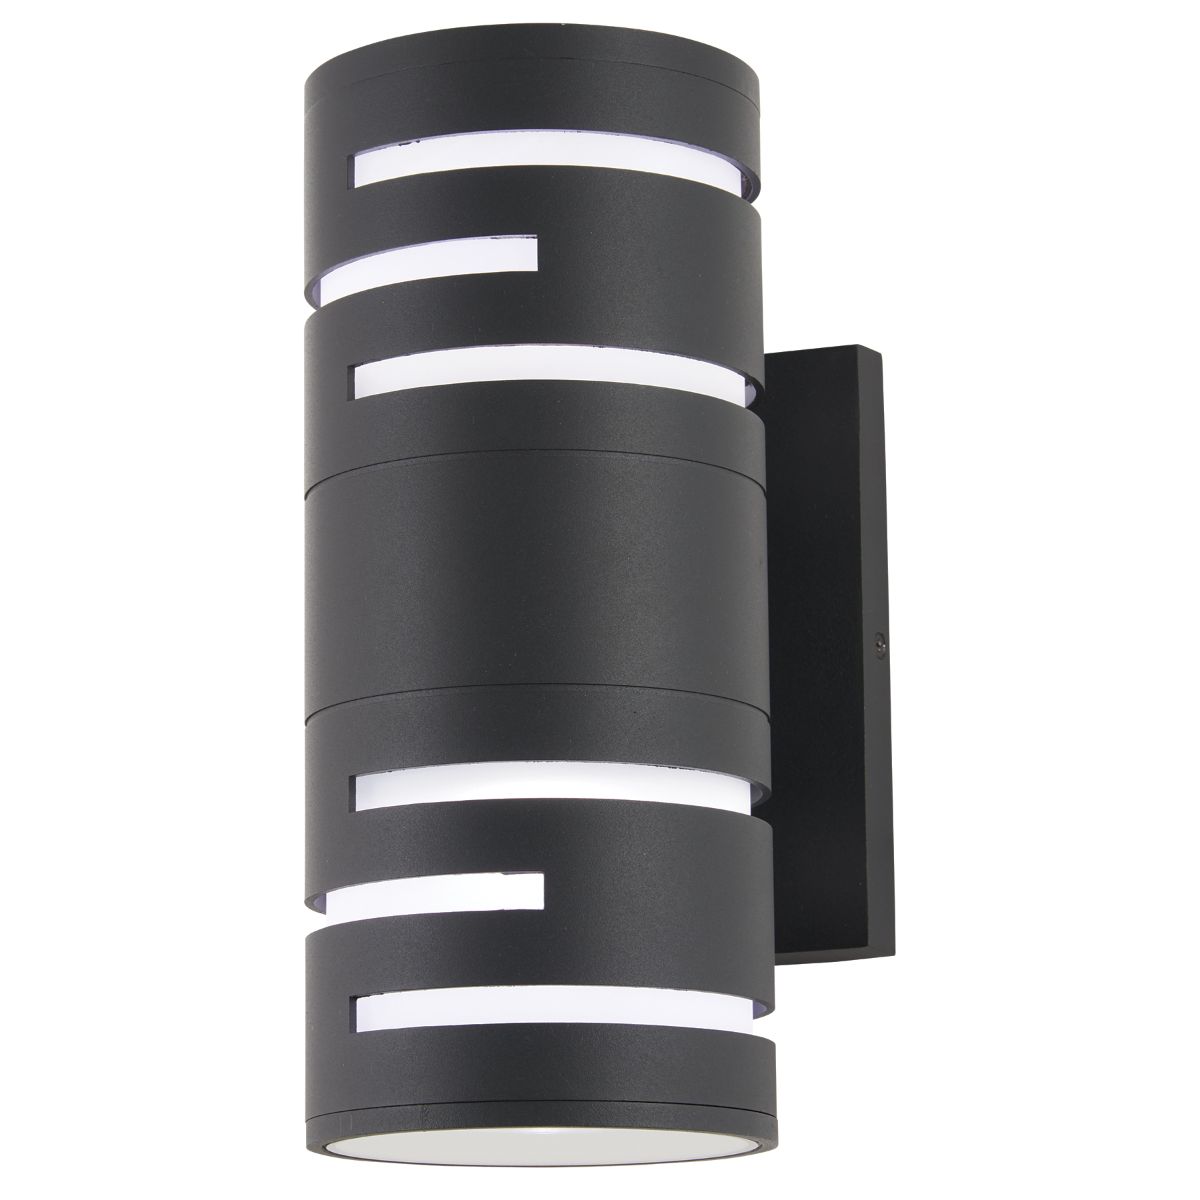 Groovin 12 In. 2 Lights LED Outdoor Wall Sconce Black Finish